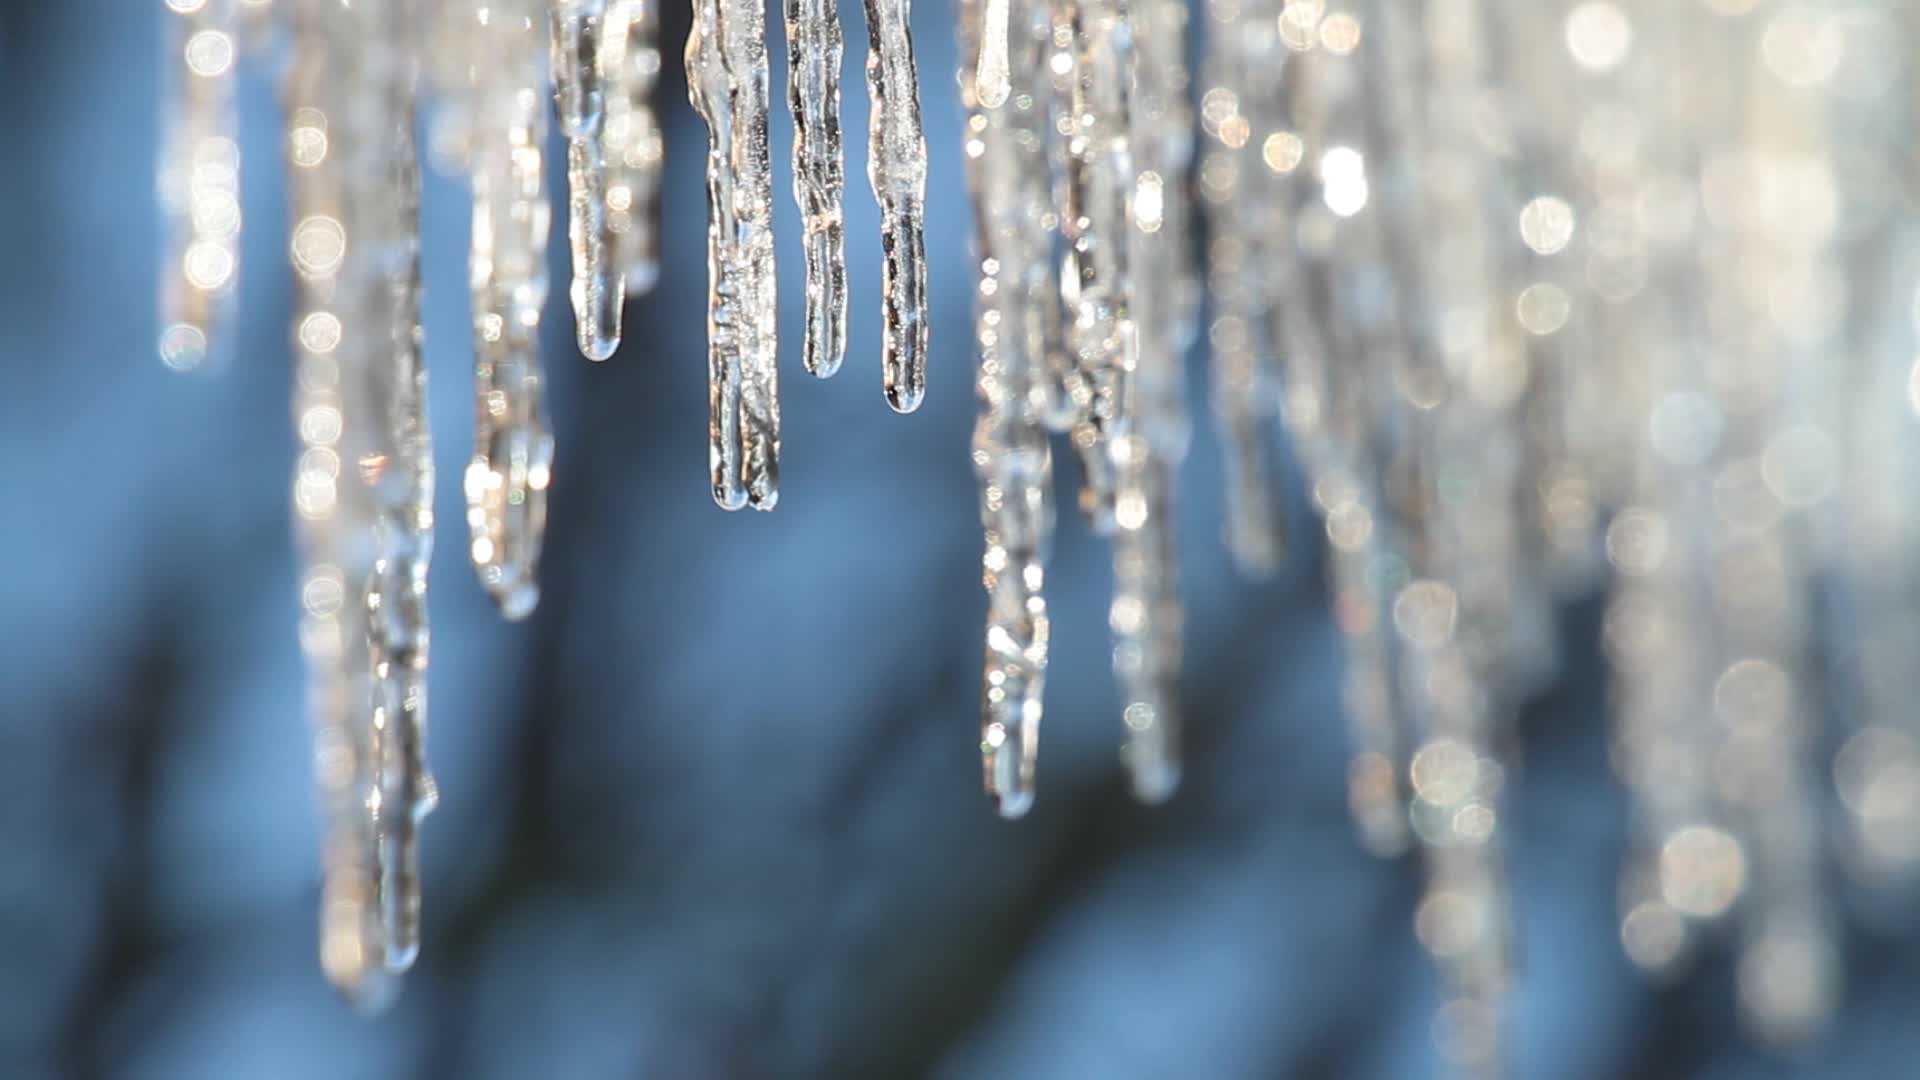 Free photo: Icicles - Abstract, Black